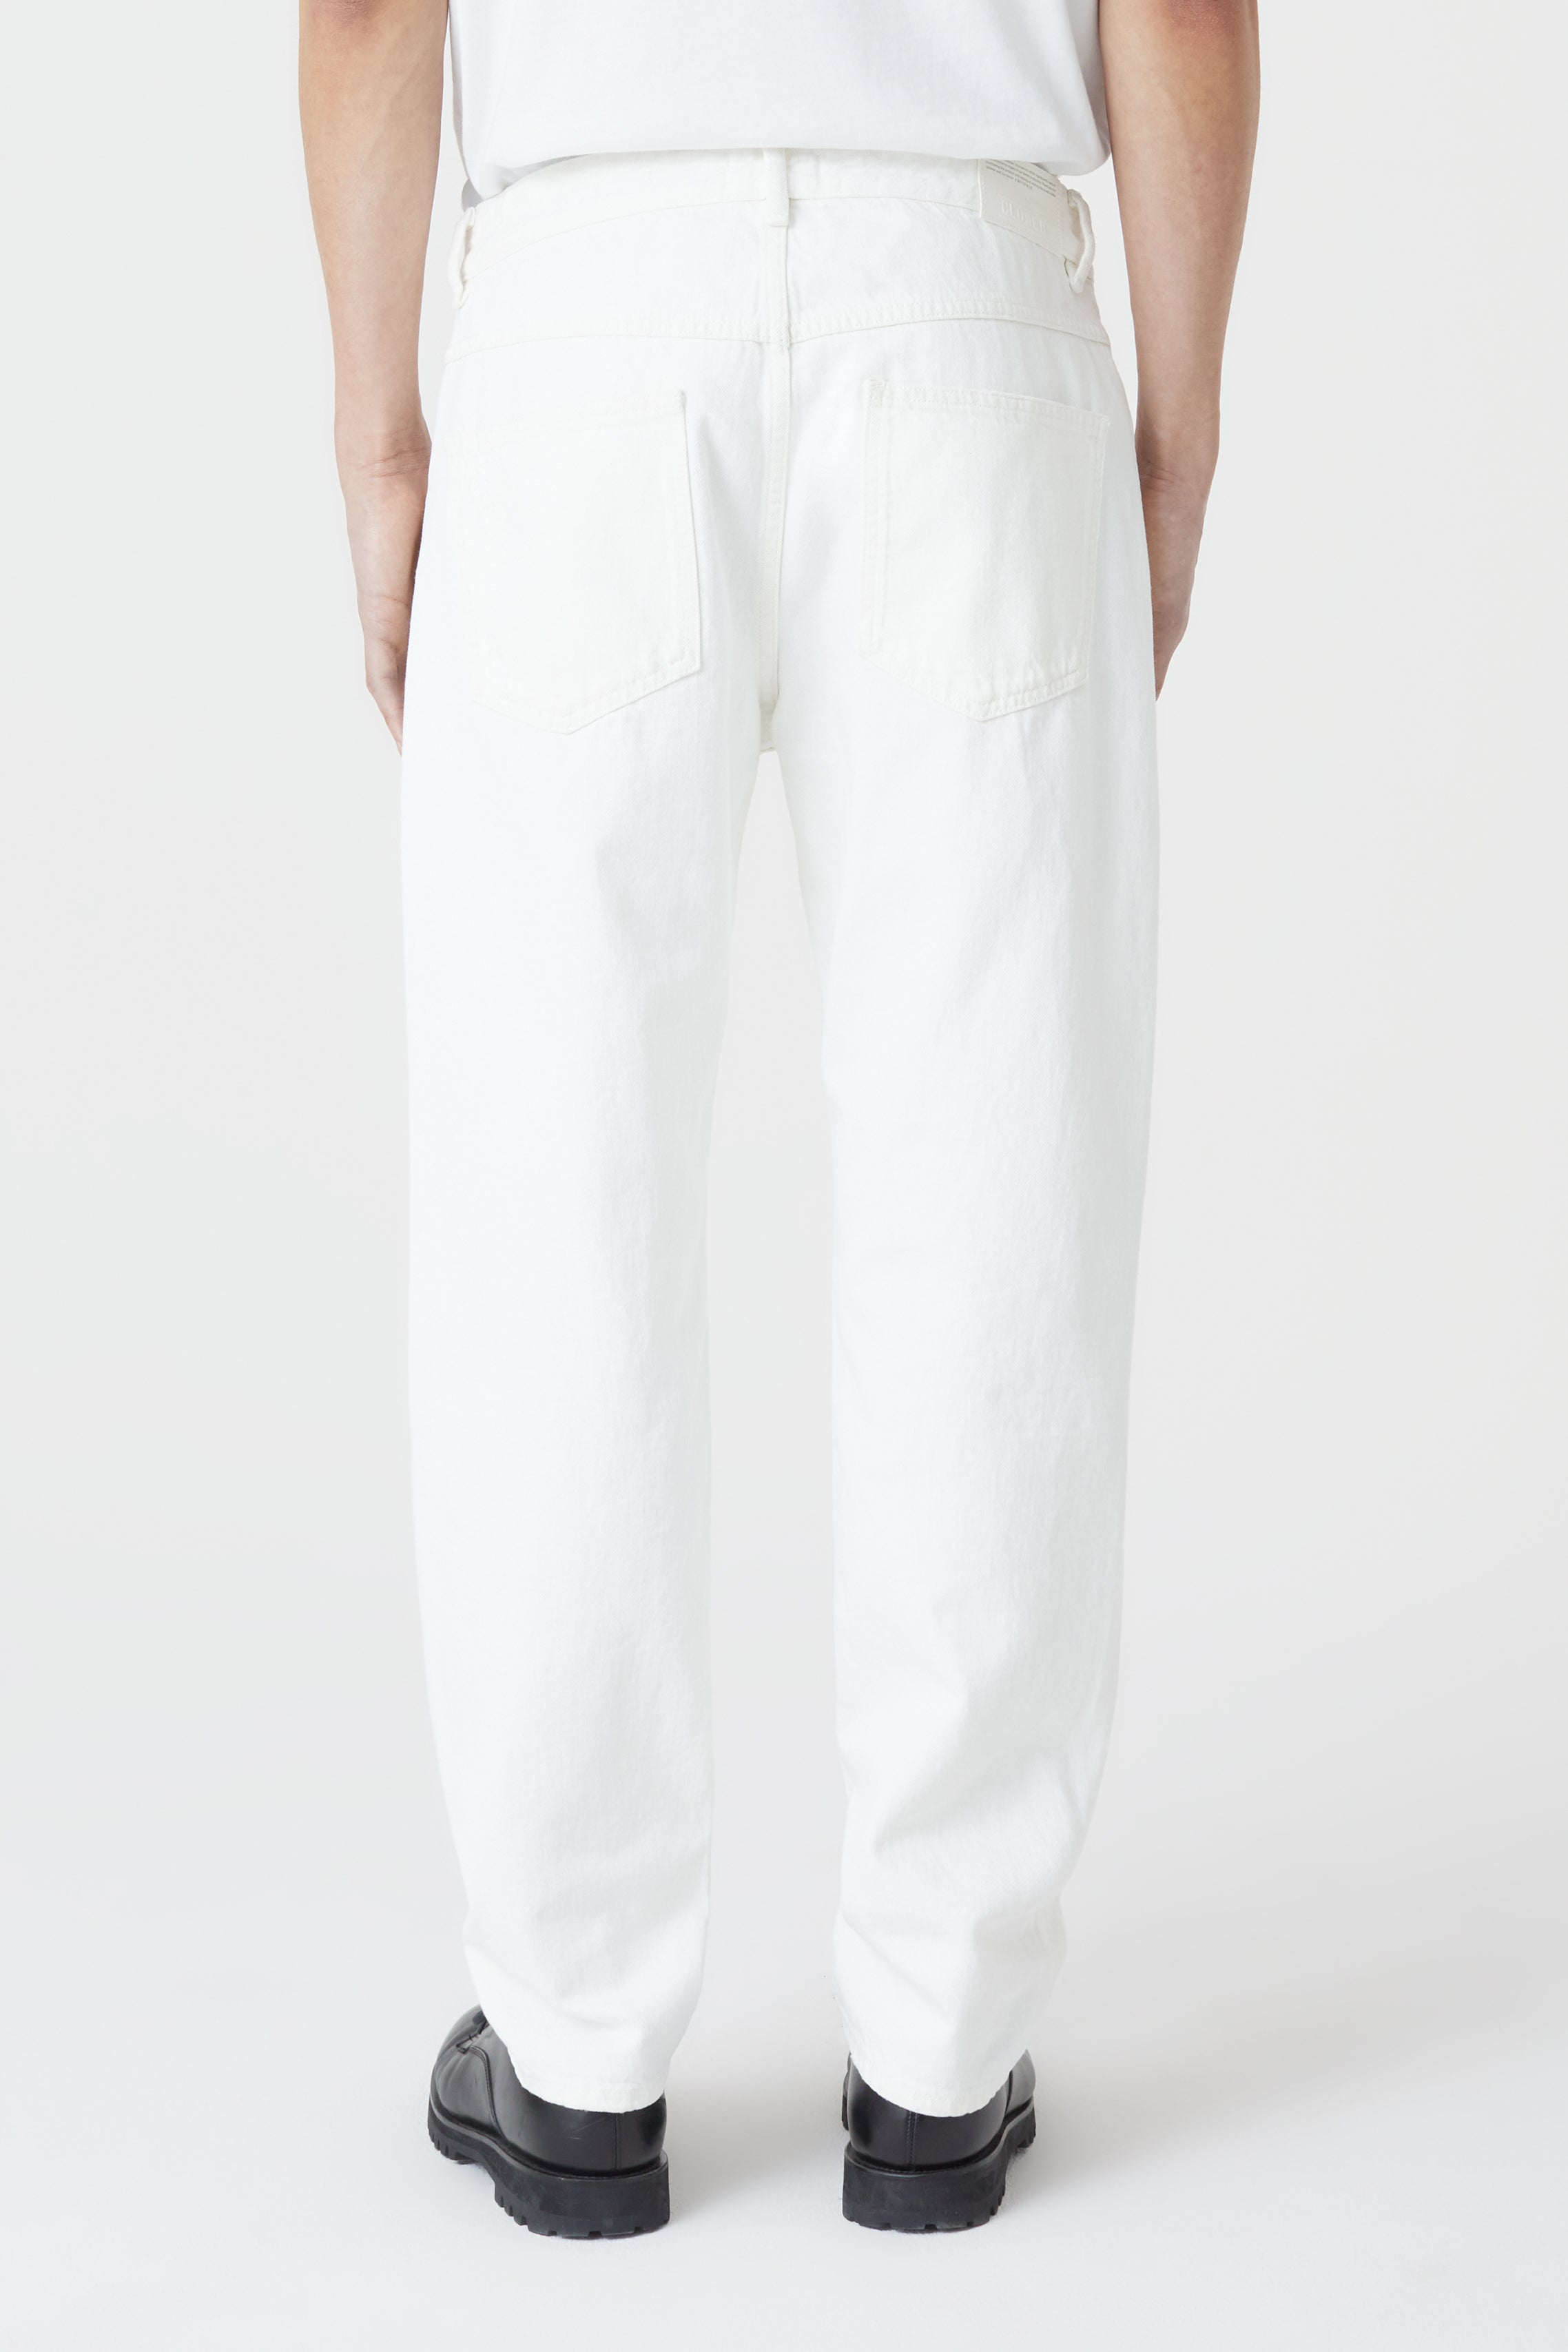 CLOSED-OUTLET-SALE-STYLE-NAME-COOPER-TAPERED-JEANS-Hosen-ARCHIVE-COLLECTION-2.jpg